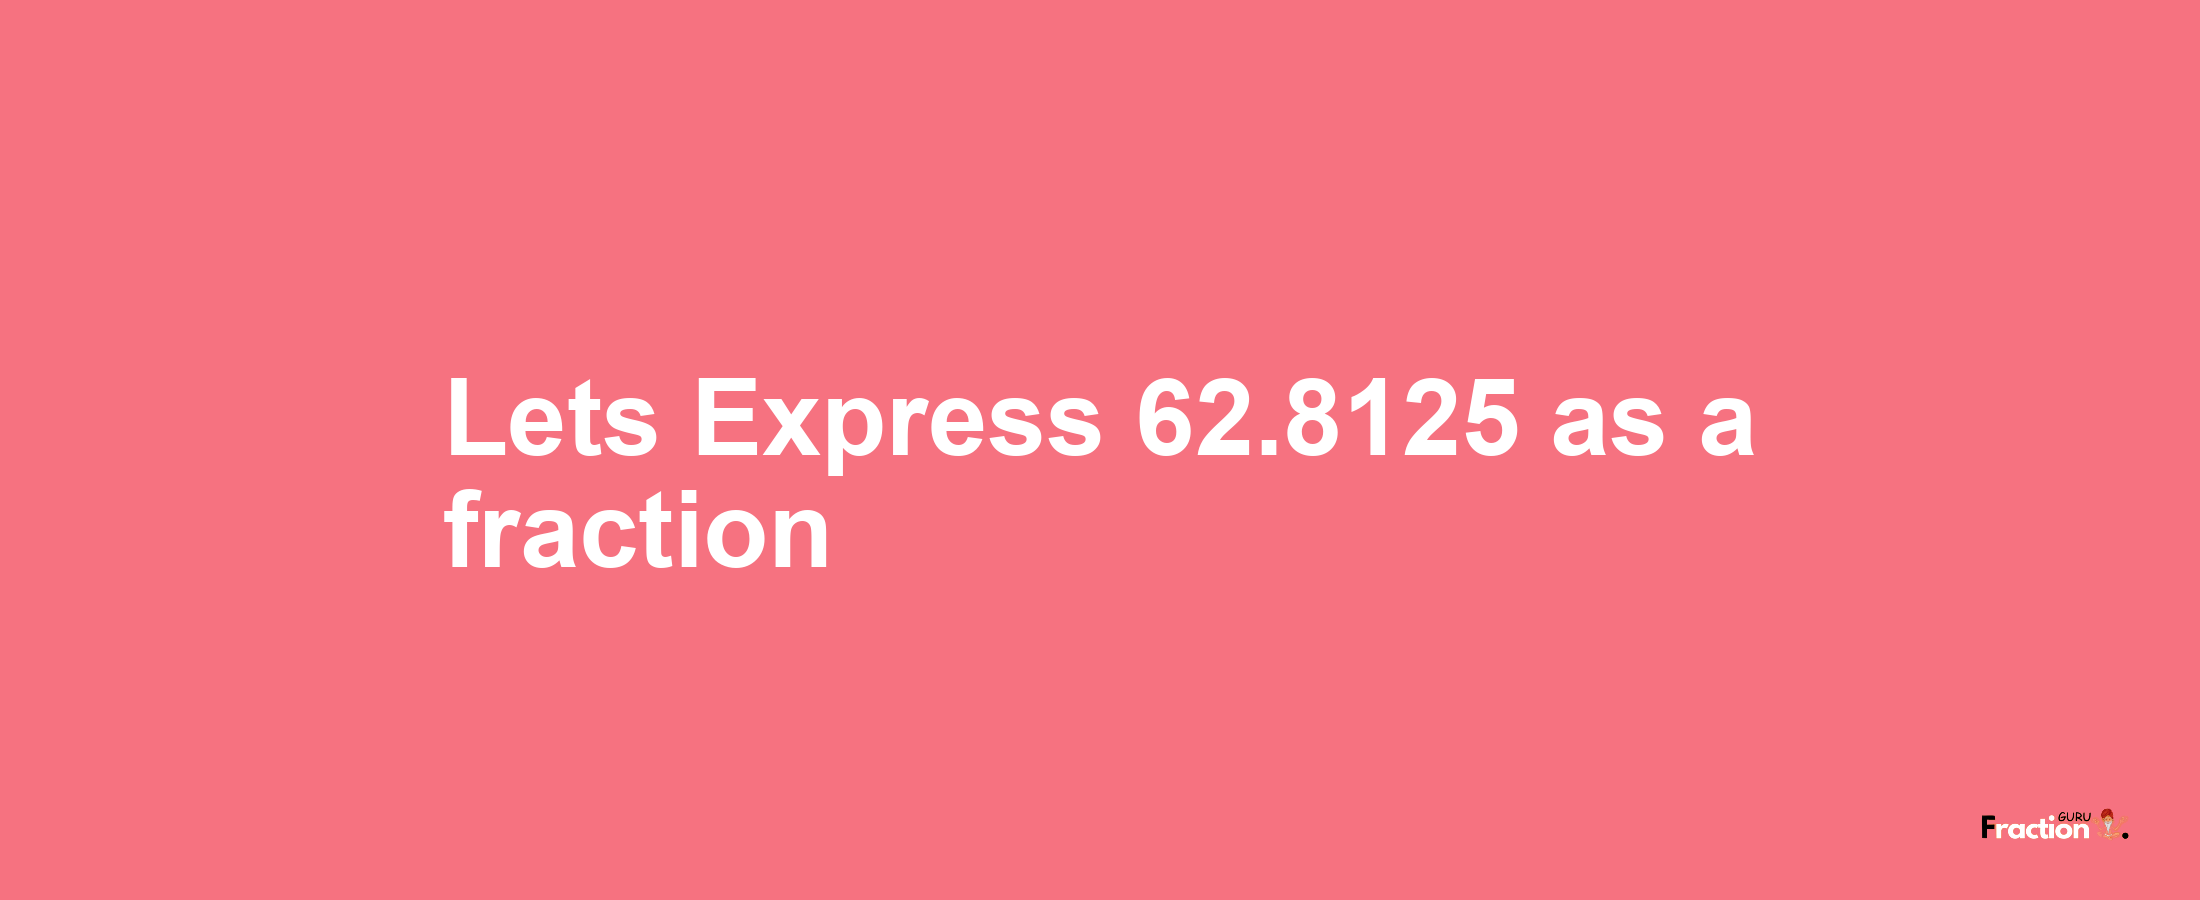 Lets Express 62.8125 as afraction